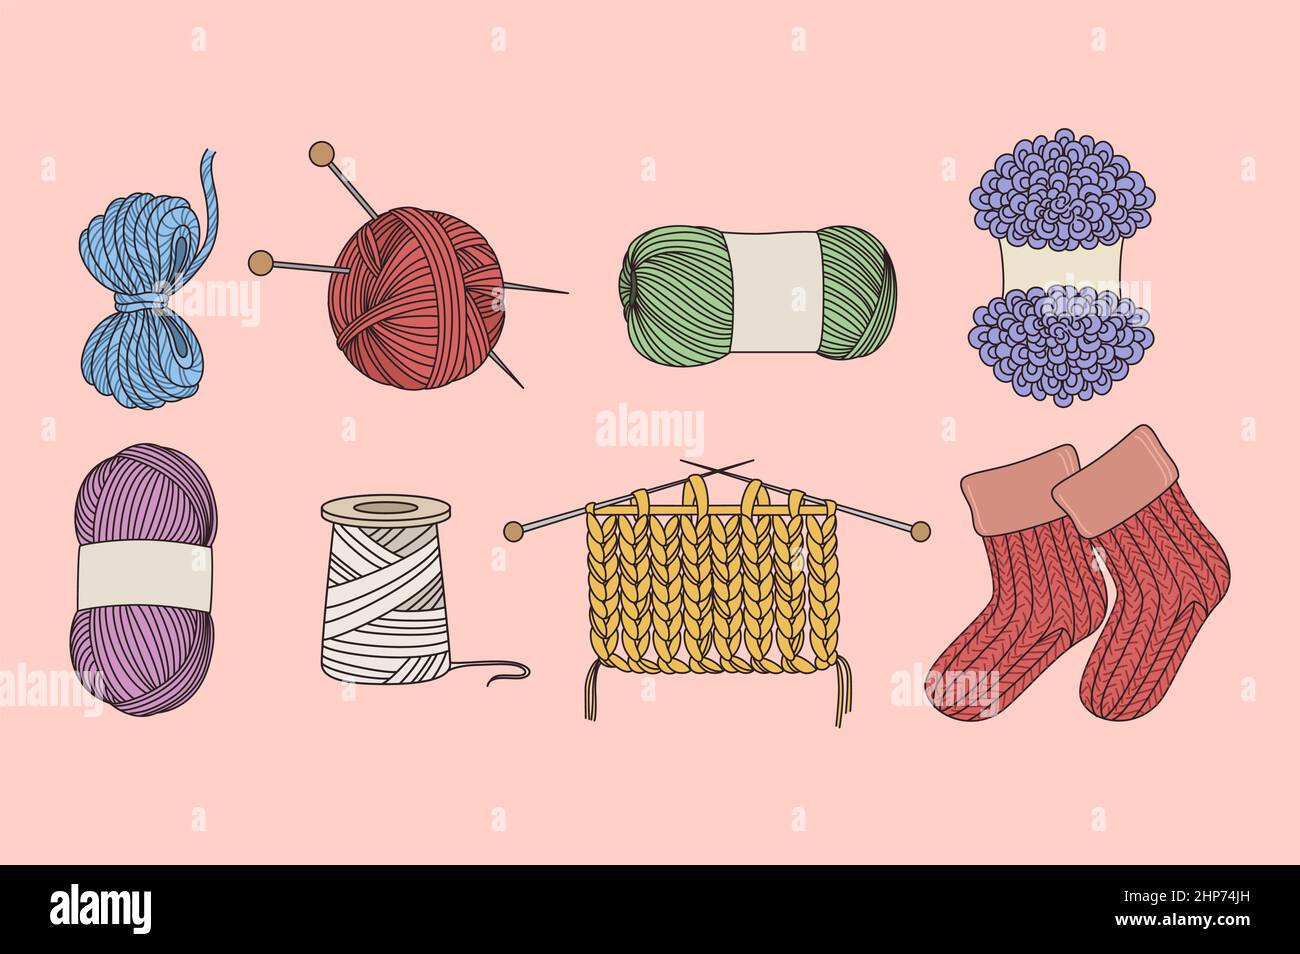 Objects and tools for knitting concept Stock Vector